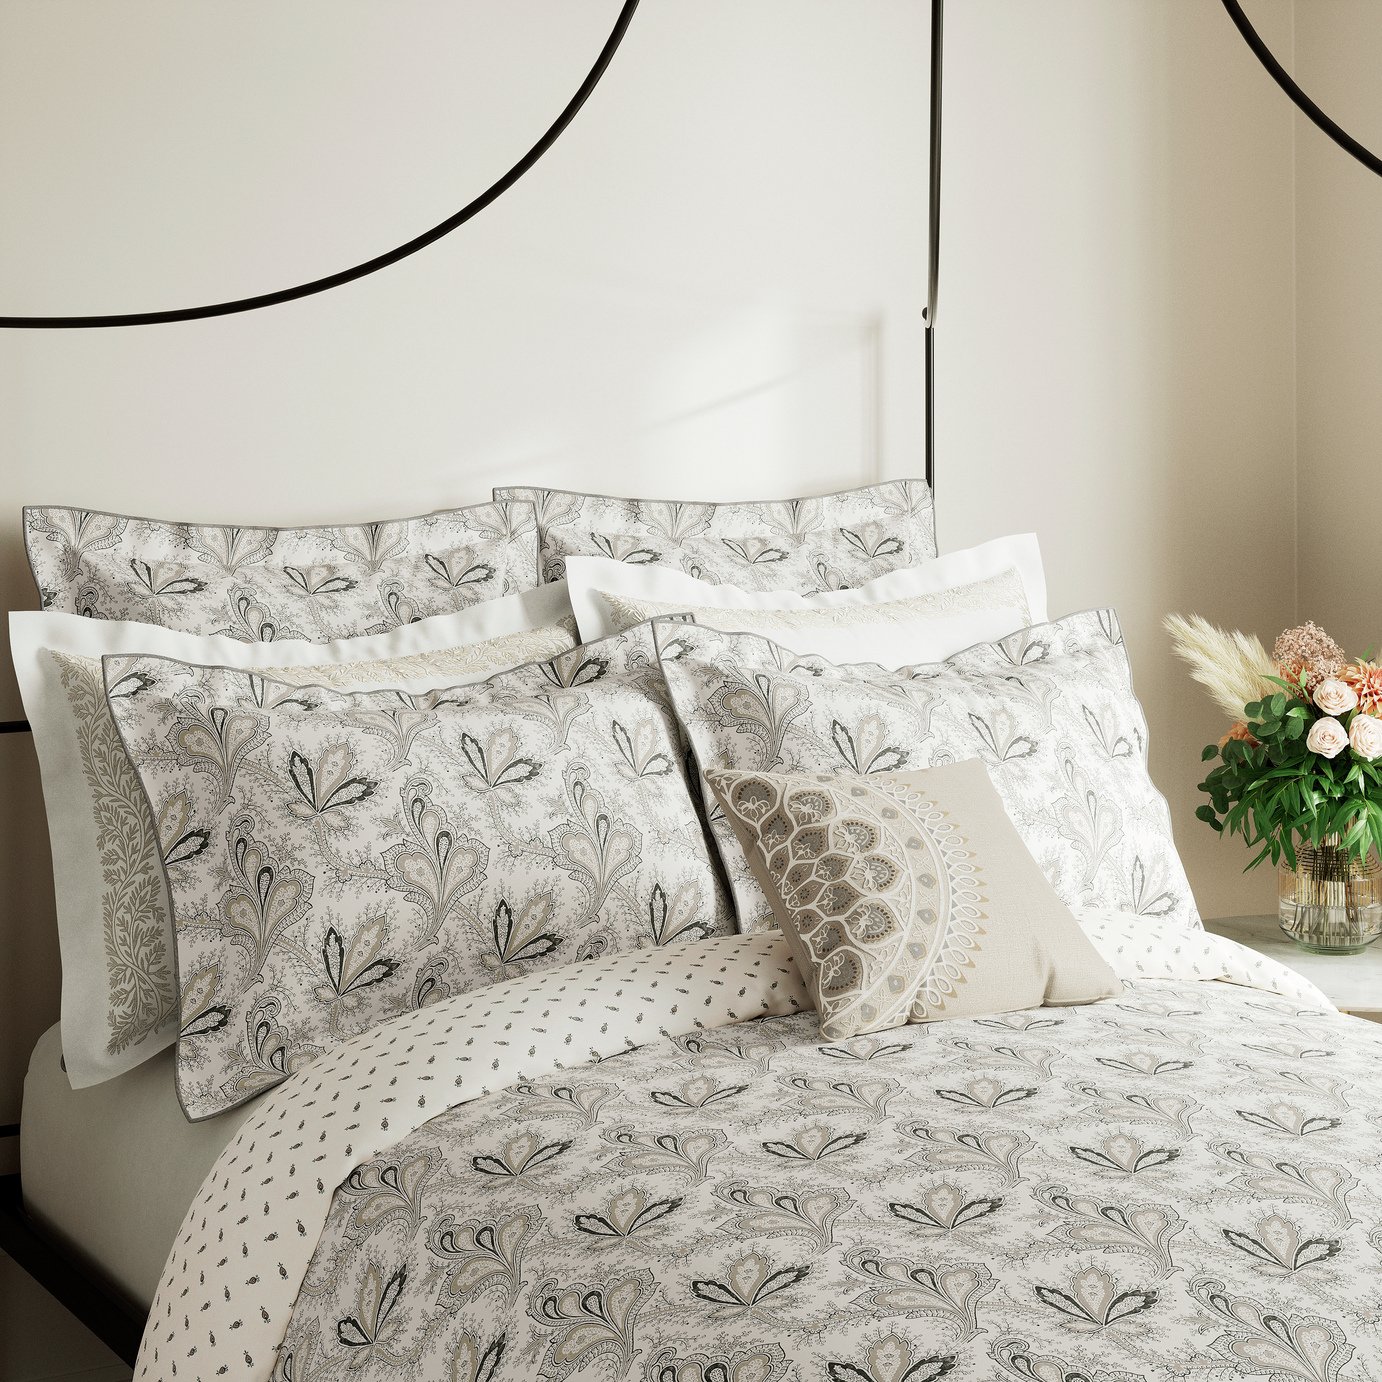 V&A Cotton Aarya Indian Paisley White Bedding Set - Double